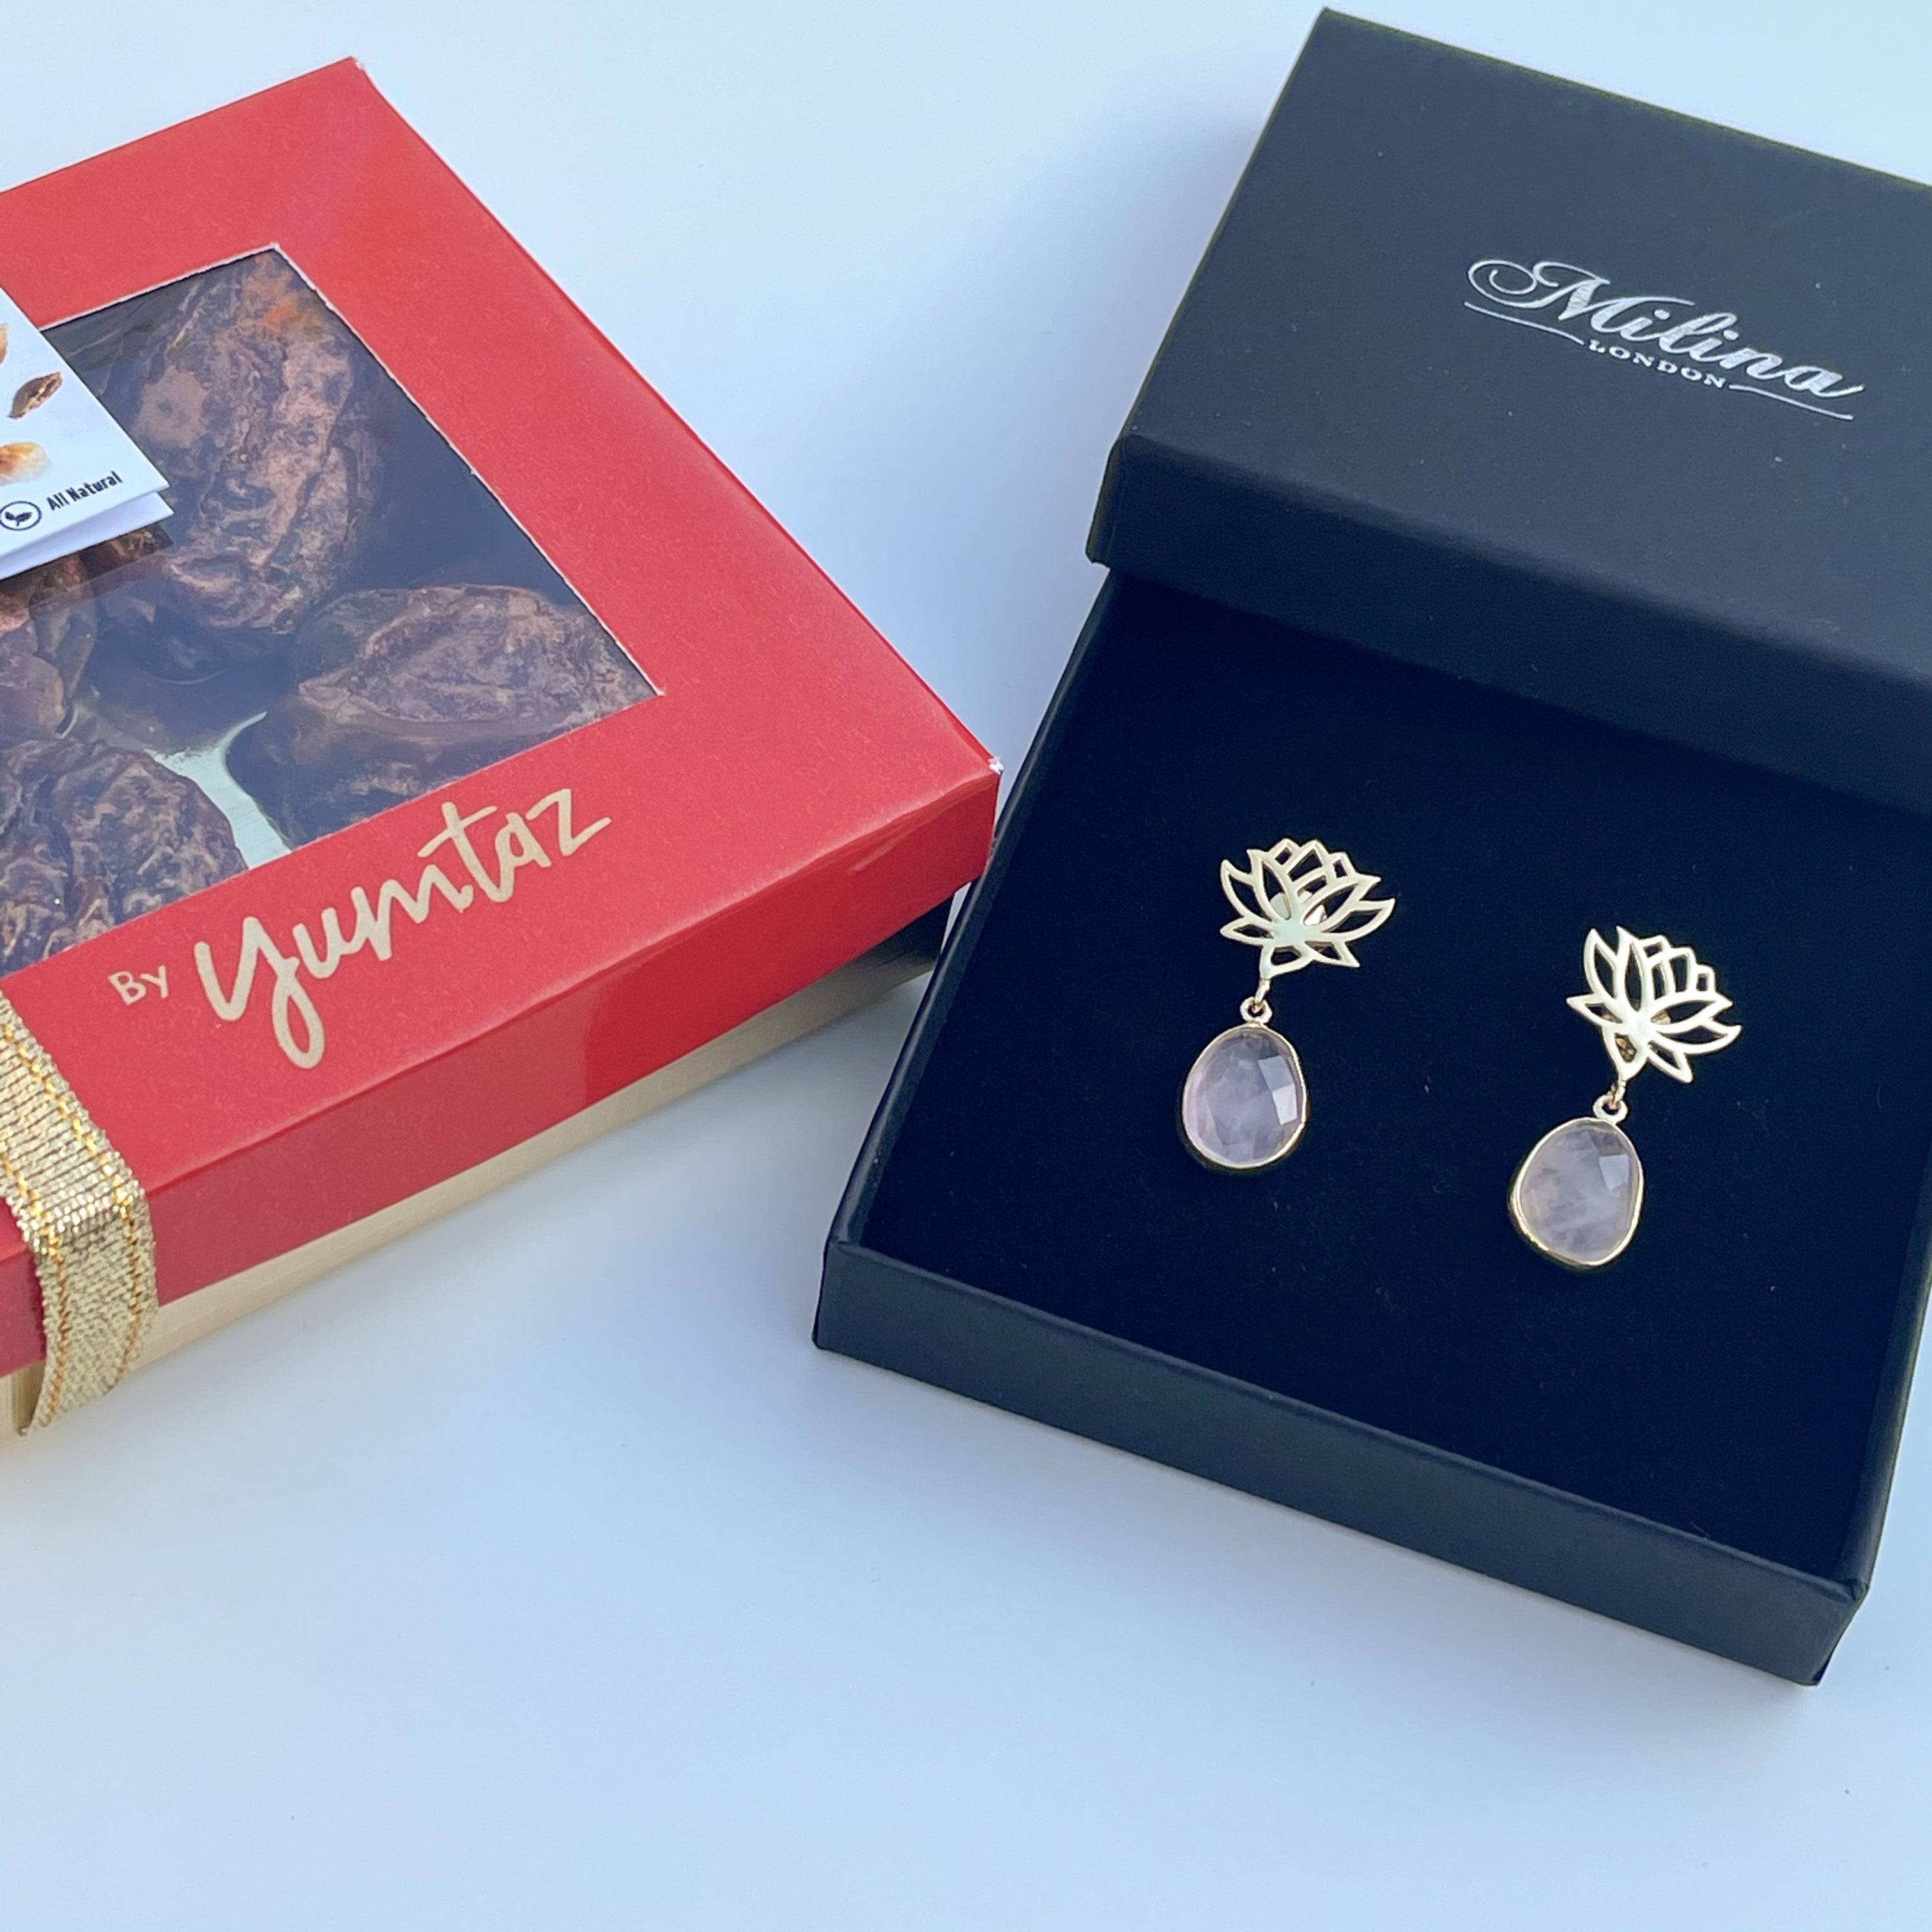 Rose Quartz Lotus Earrings in Gold Plated Sterling Silver with a box of 4 Stuffed Medjool Dates